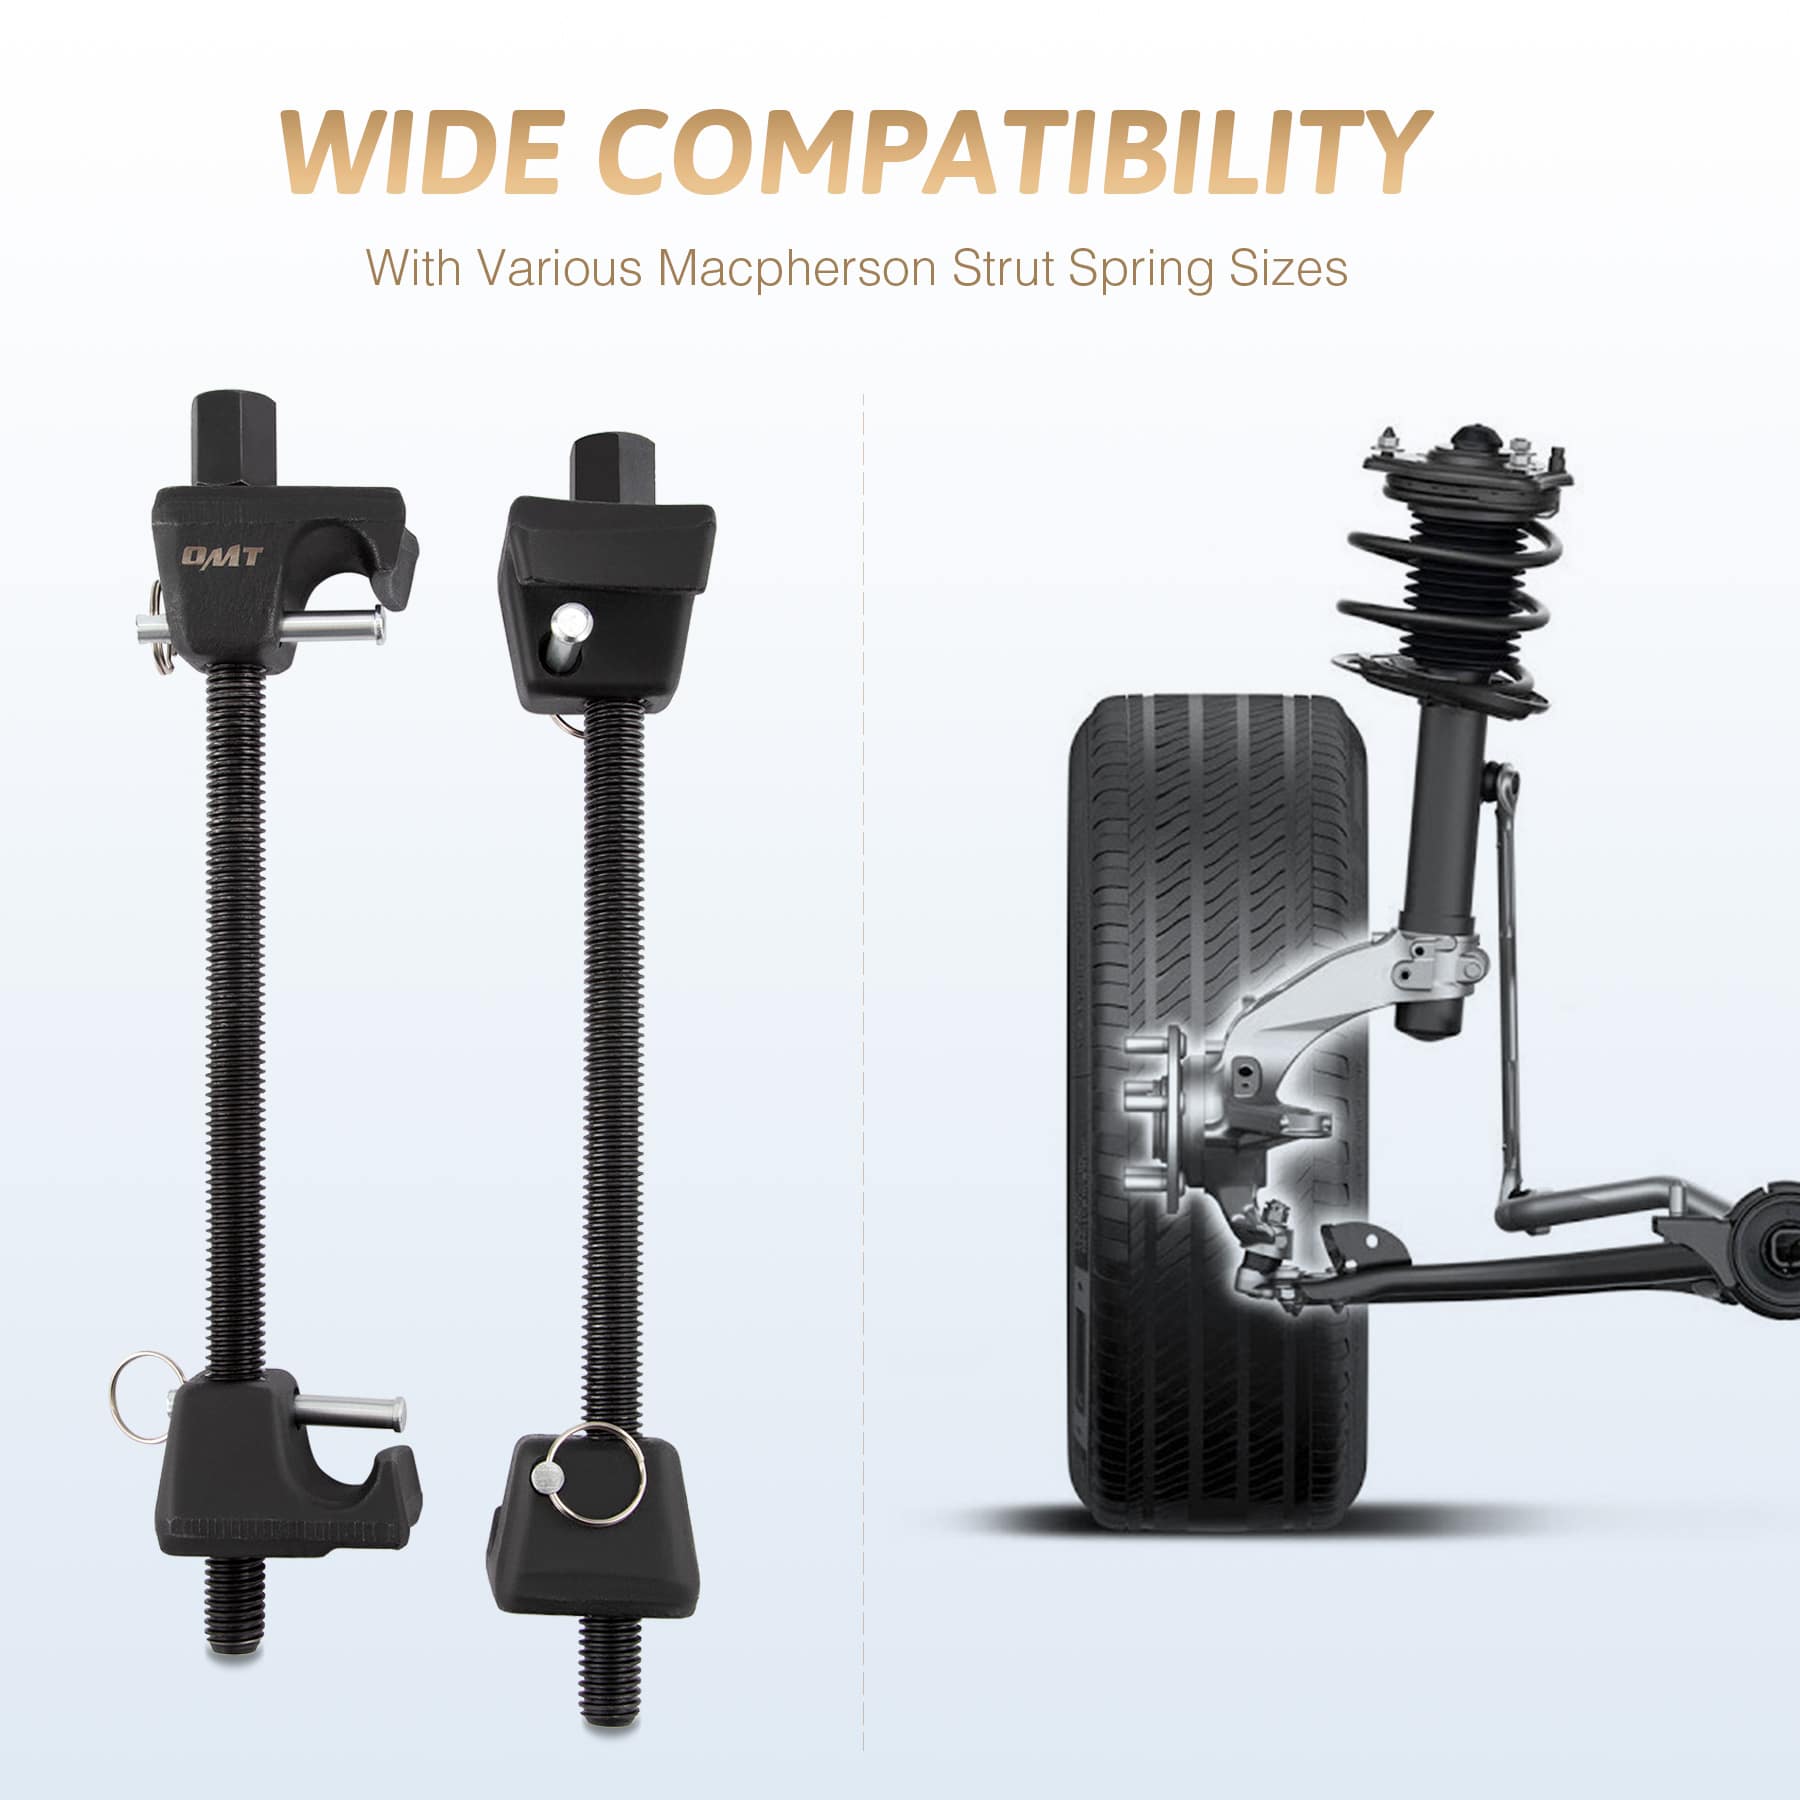 Compatible with Various Macpherson Strut Spring Sizes